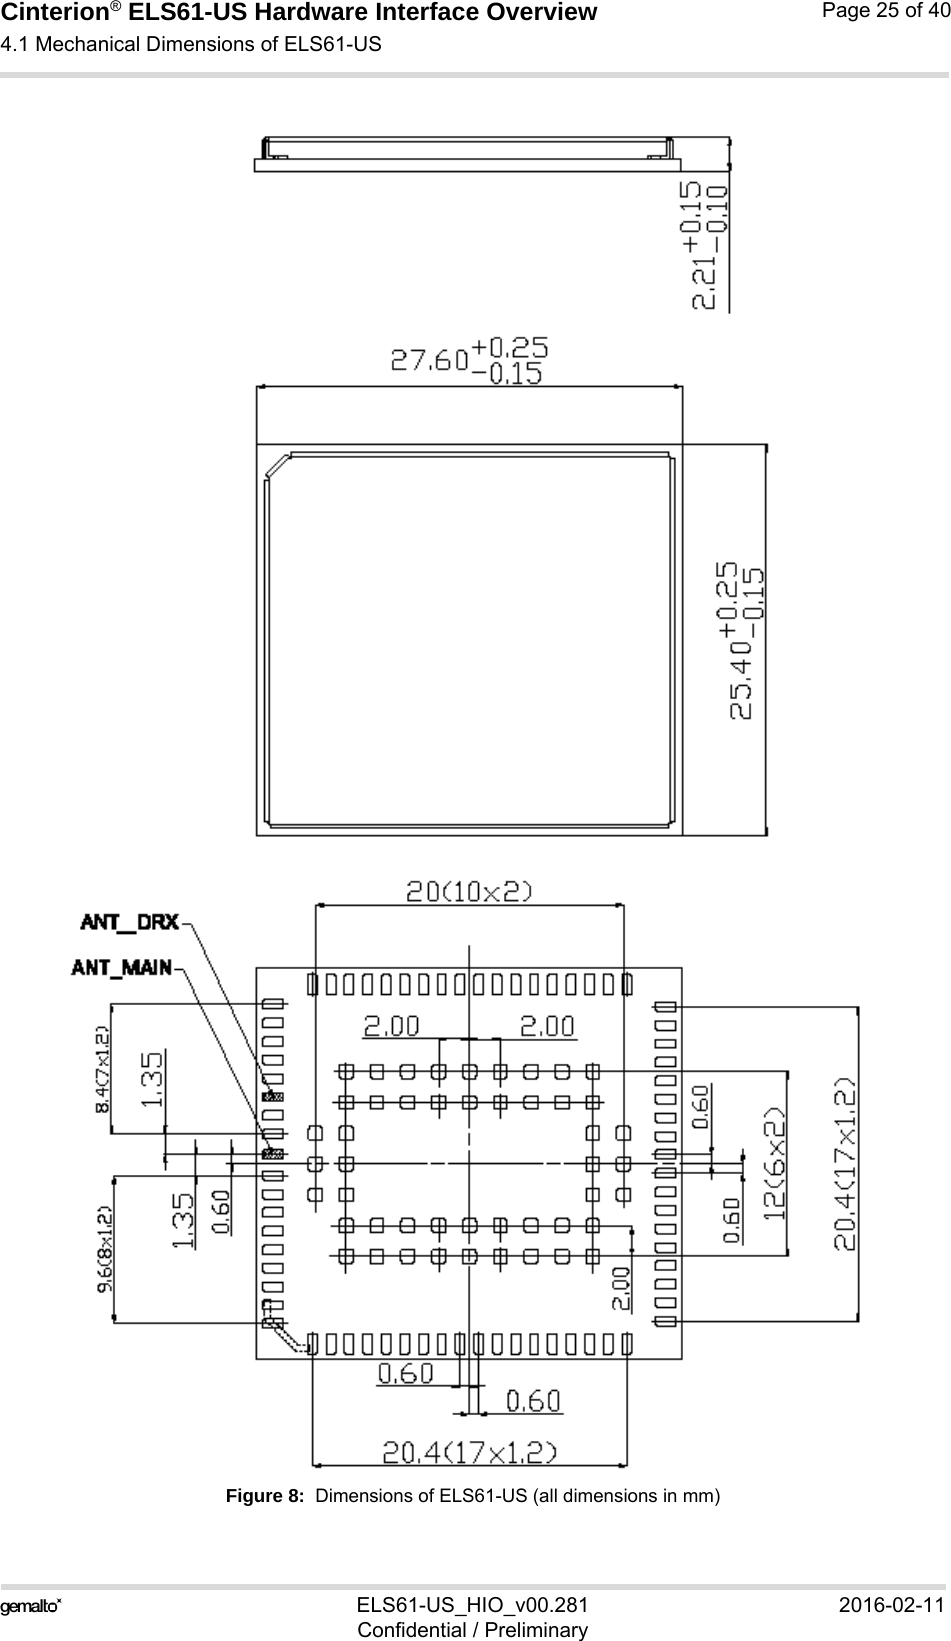 Cinterion® ELS61-US Hardware Interface Overview4.1 Mechanical Dimensions of ELS61-US25ELS61-US_HIO_v00.281 2016-02-11Confidential / PreliminaryPage 25 of 40Figure 8:  Dimensions of ELS61-US (all dimensions in mm)